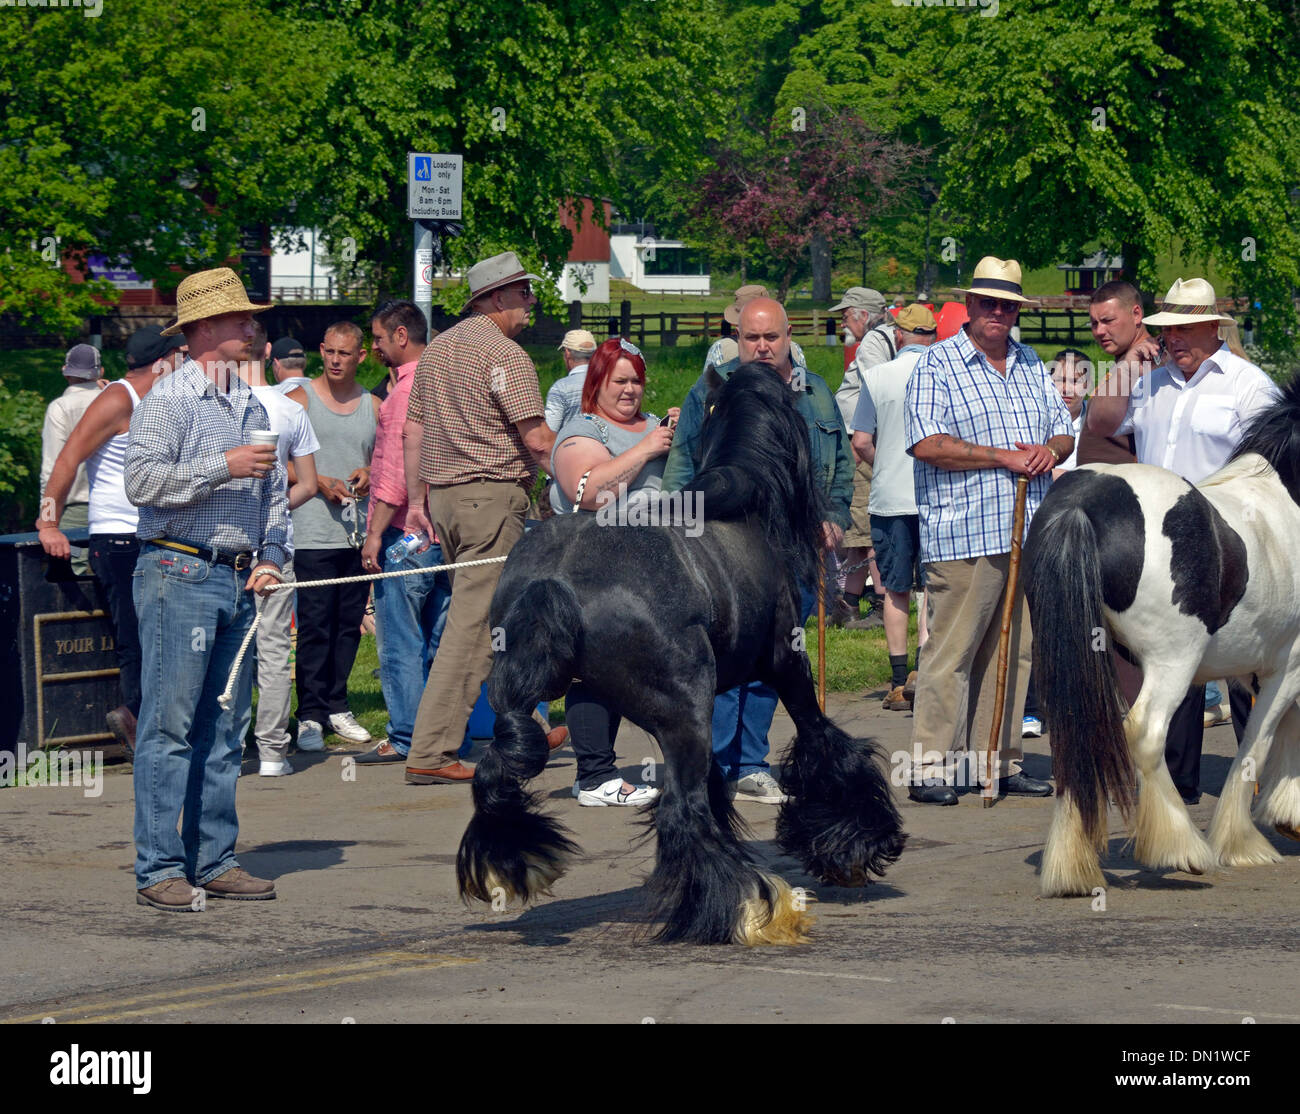 Gypsy travellers with horses. Appleby Horse Fair, June 2013. Appleby-in-Westmorland, Cumbria, England, United Kingdom, Europe. Stock Photo